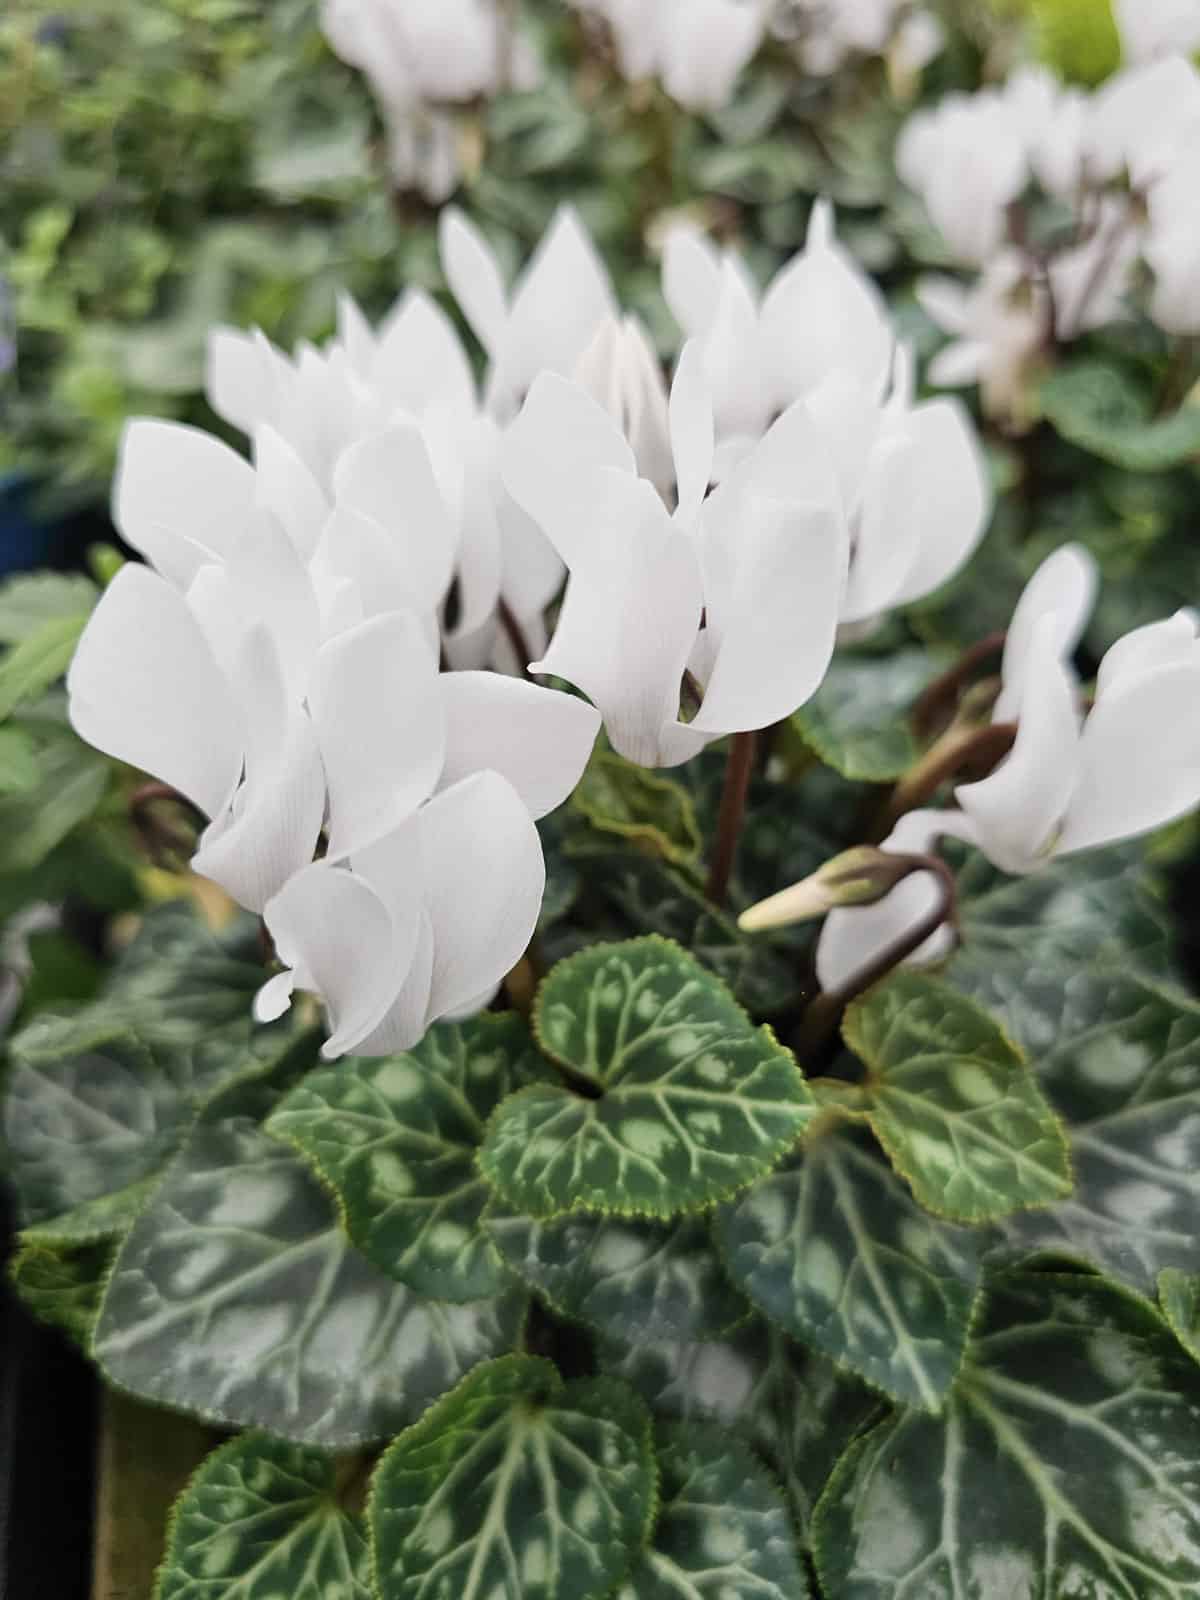 Pure white leaves of a Cyclamen flower in the garden